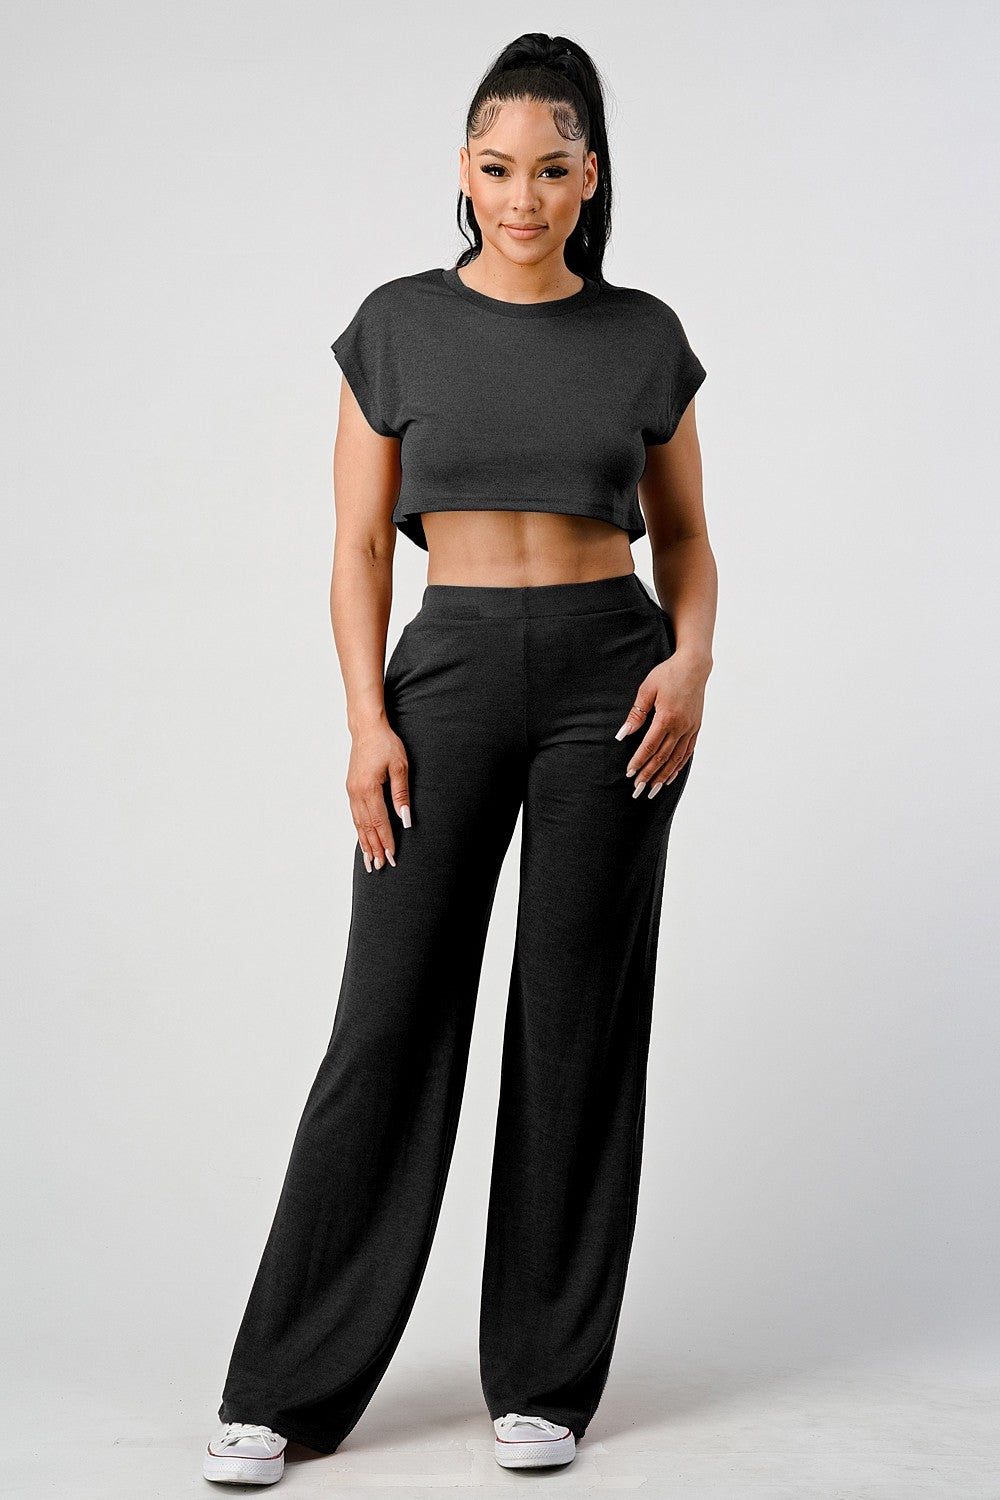 Short Sleeve Crop Top and Wide Leg Pant Set